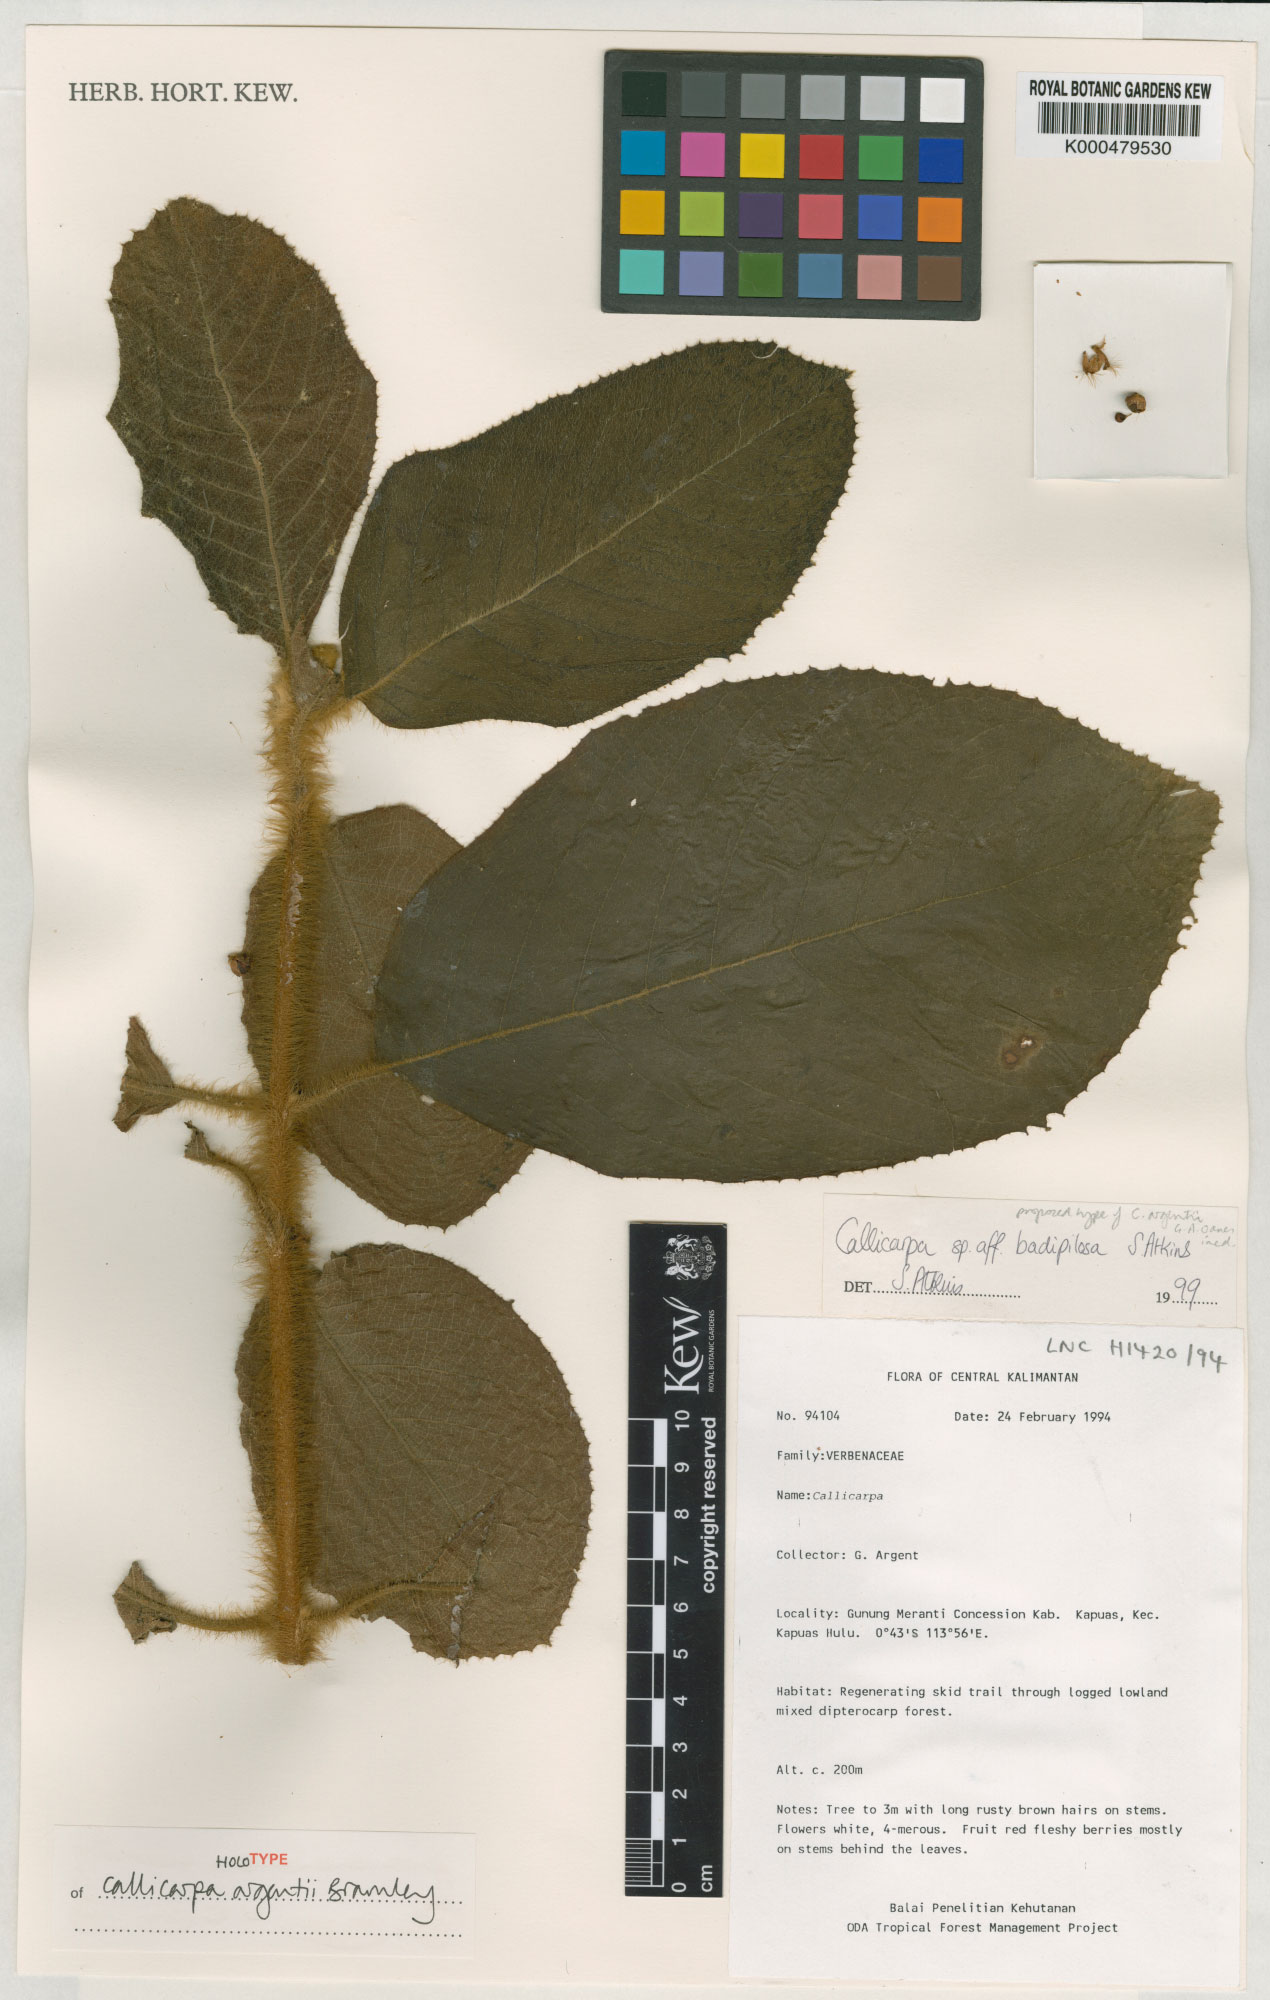 A Herbarium specimen: leaves mounted on paper 